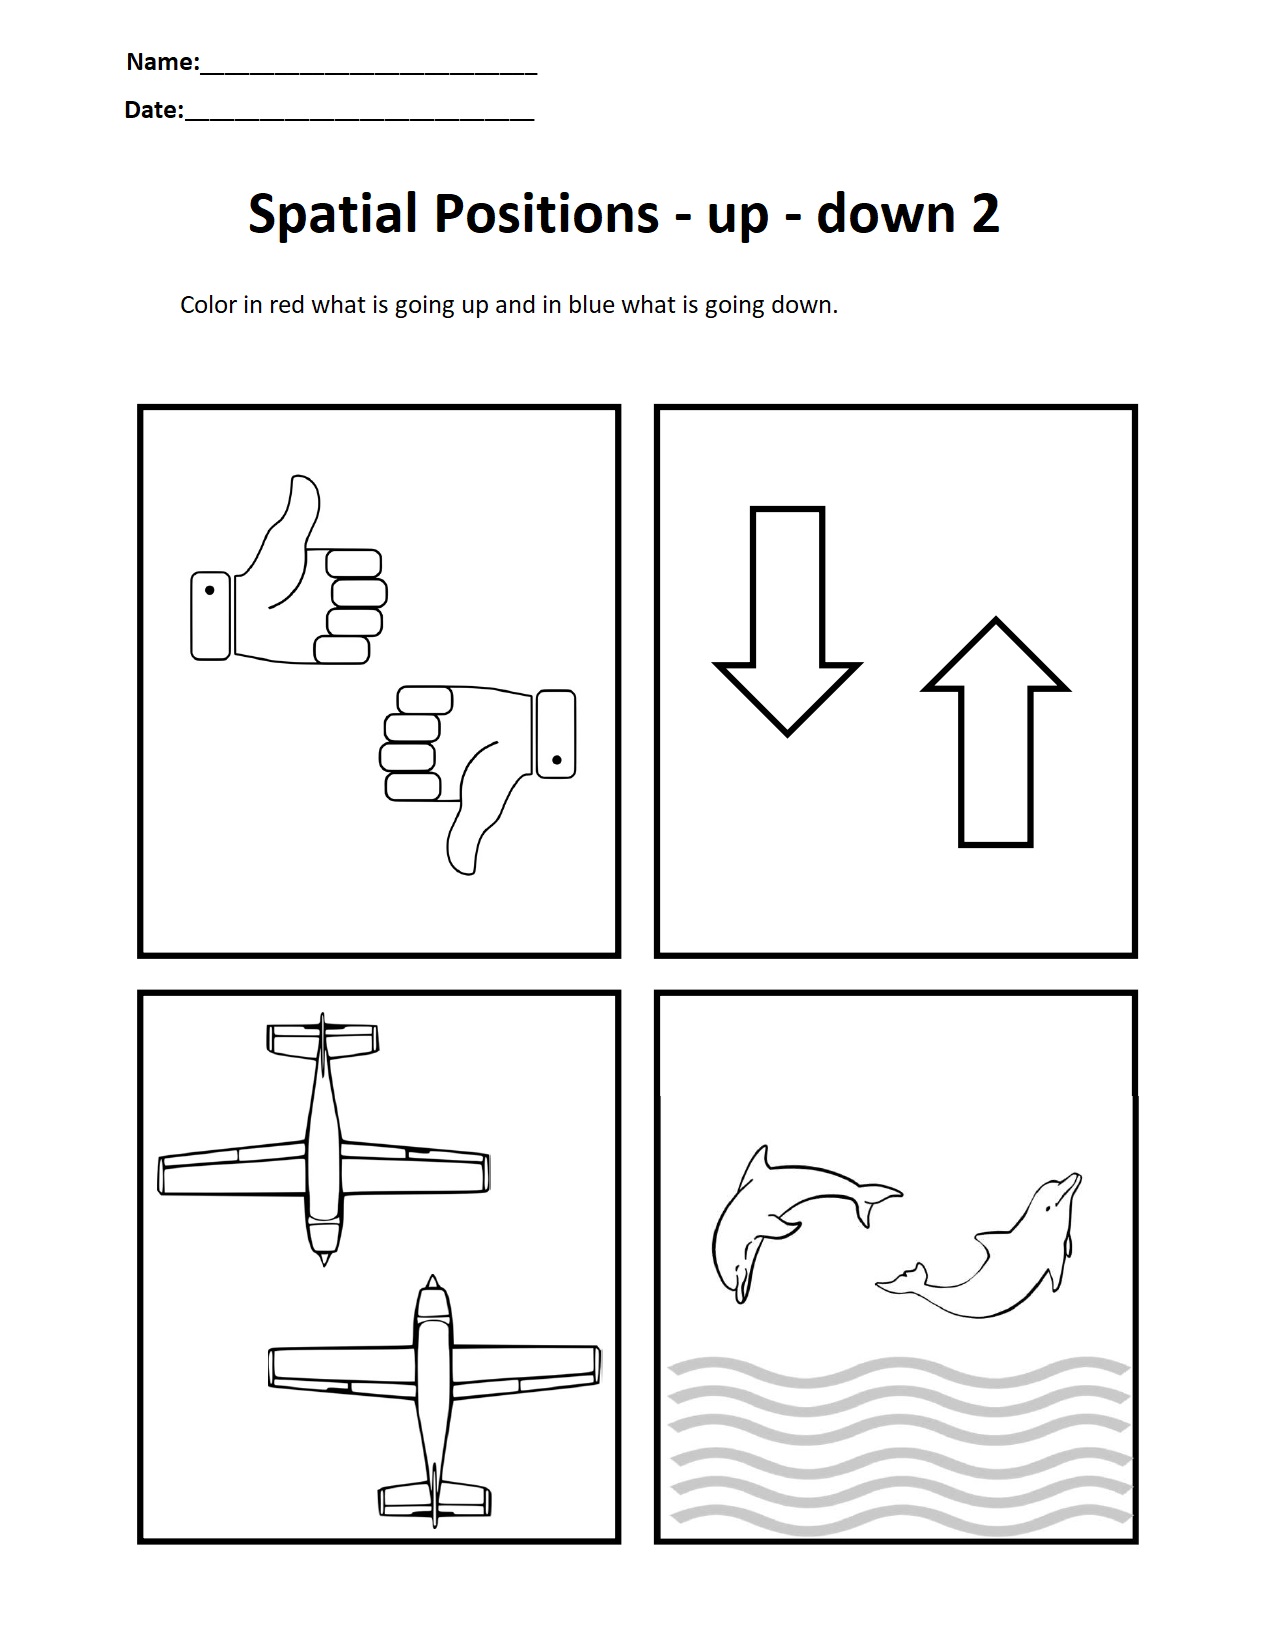 Spatial Positions - up - down 2.jpg